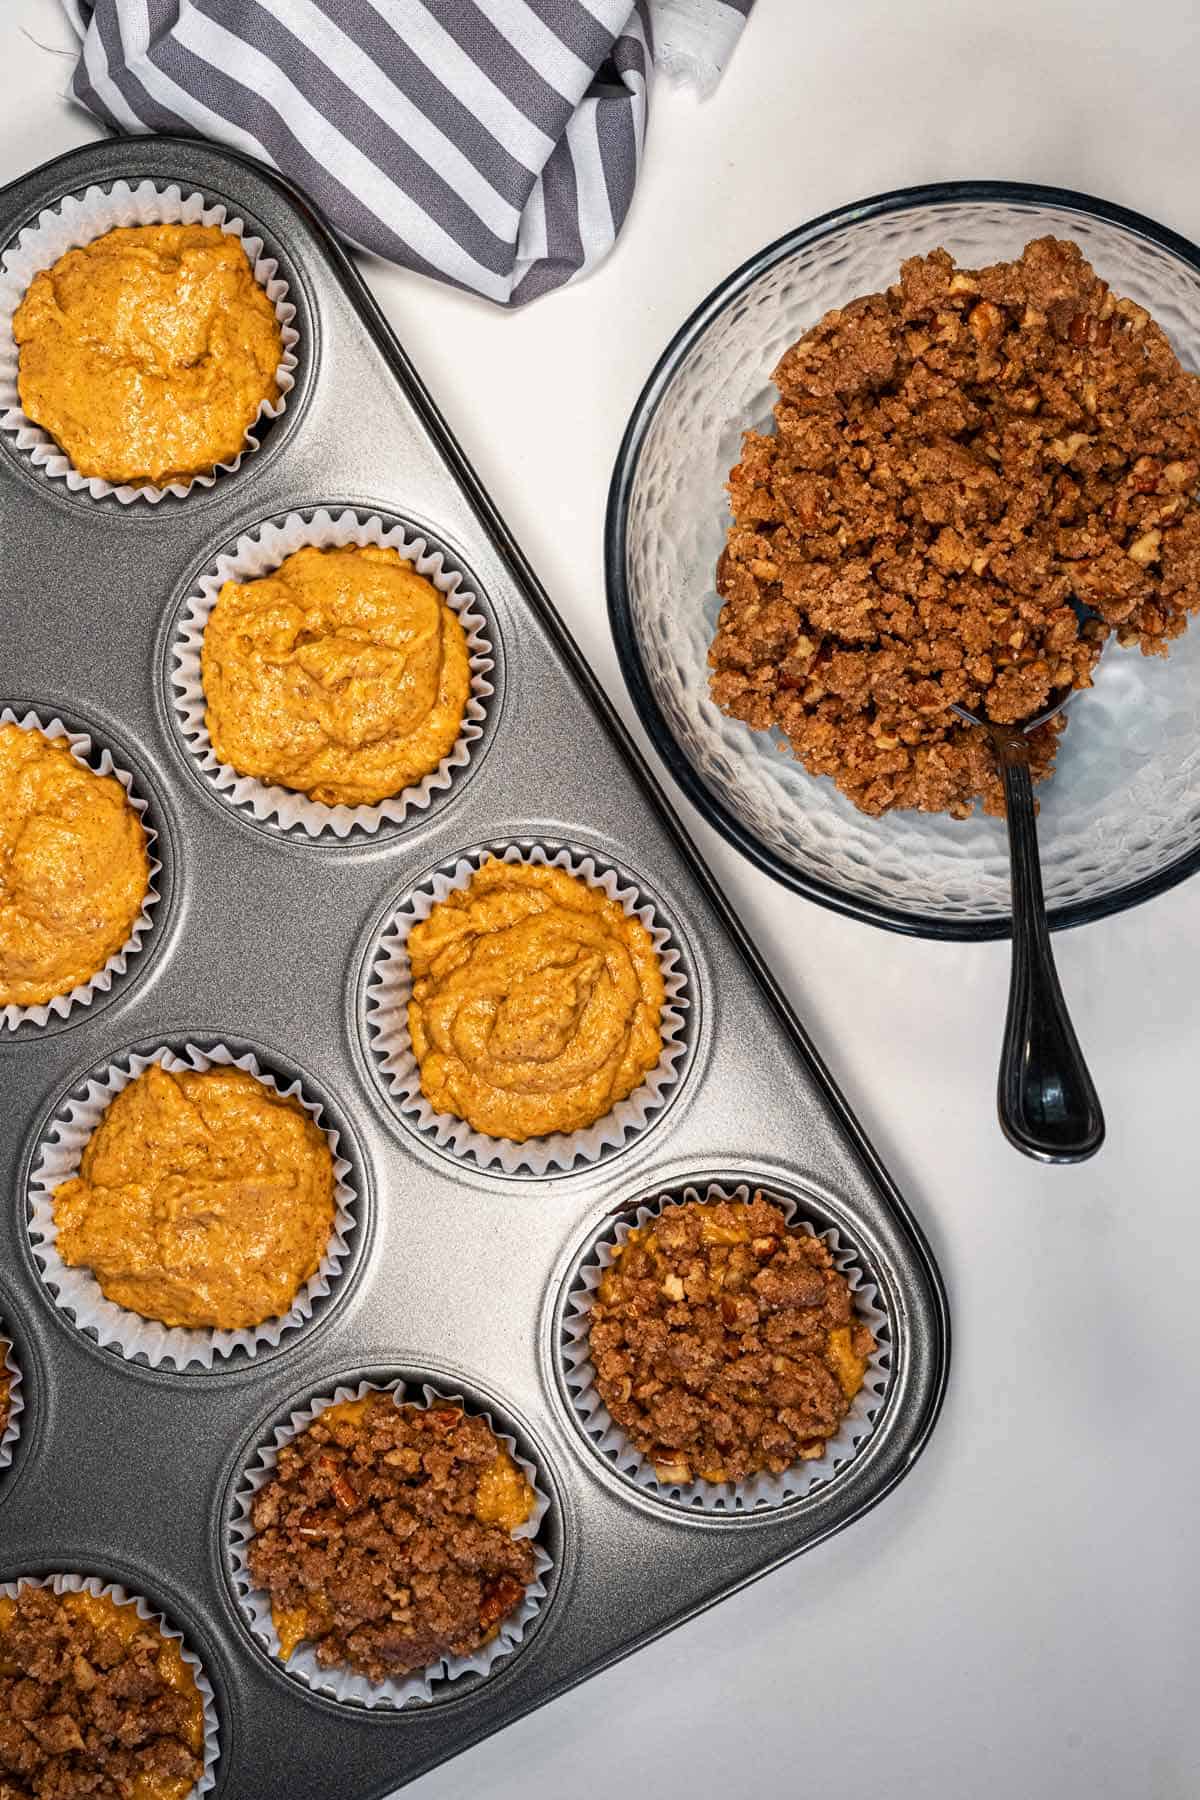 Unbaked Vegan Pumpkin Muffins in the tin ready to be topped with the bowl of crumble topping on the side.